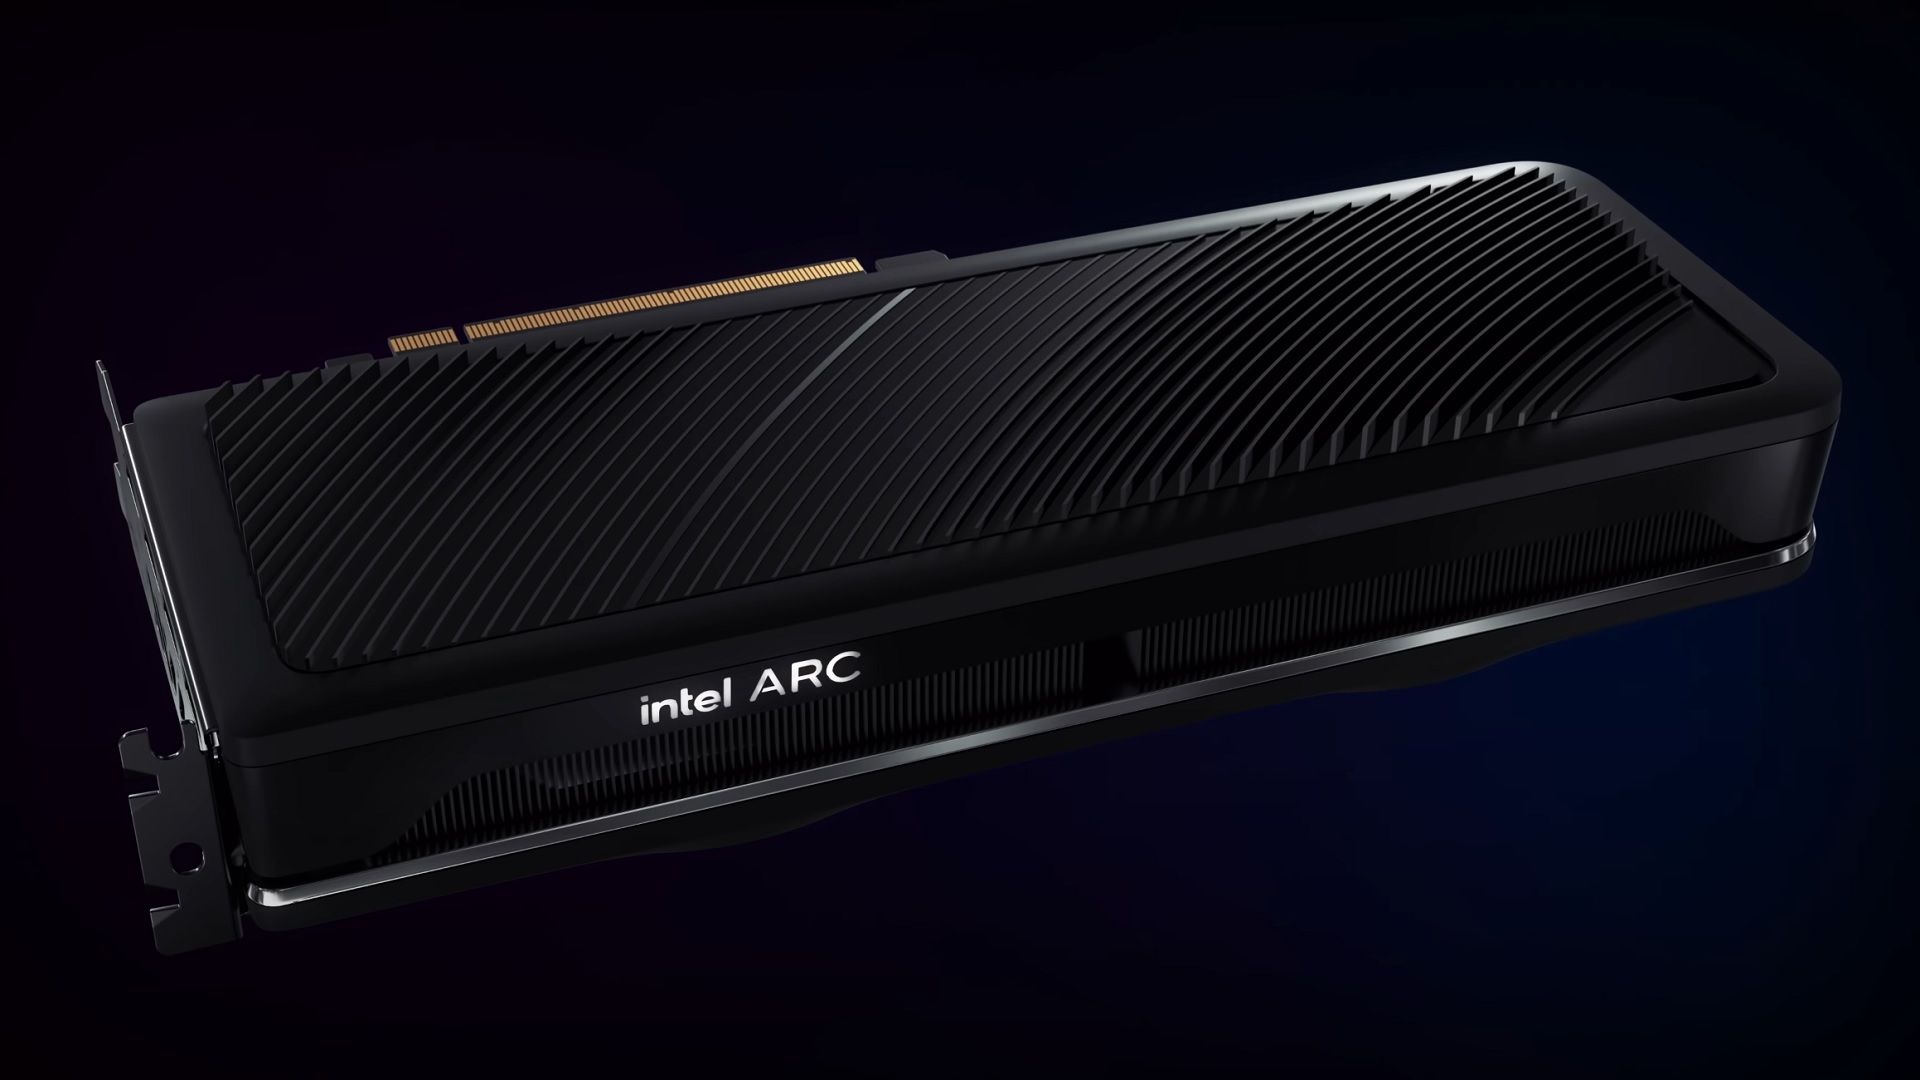 Intel has accidentally leaked data on its flagship Arc graphics card photo 2